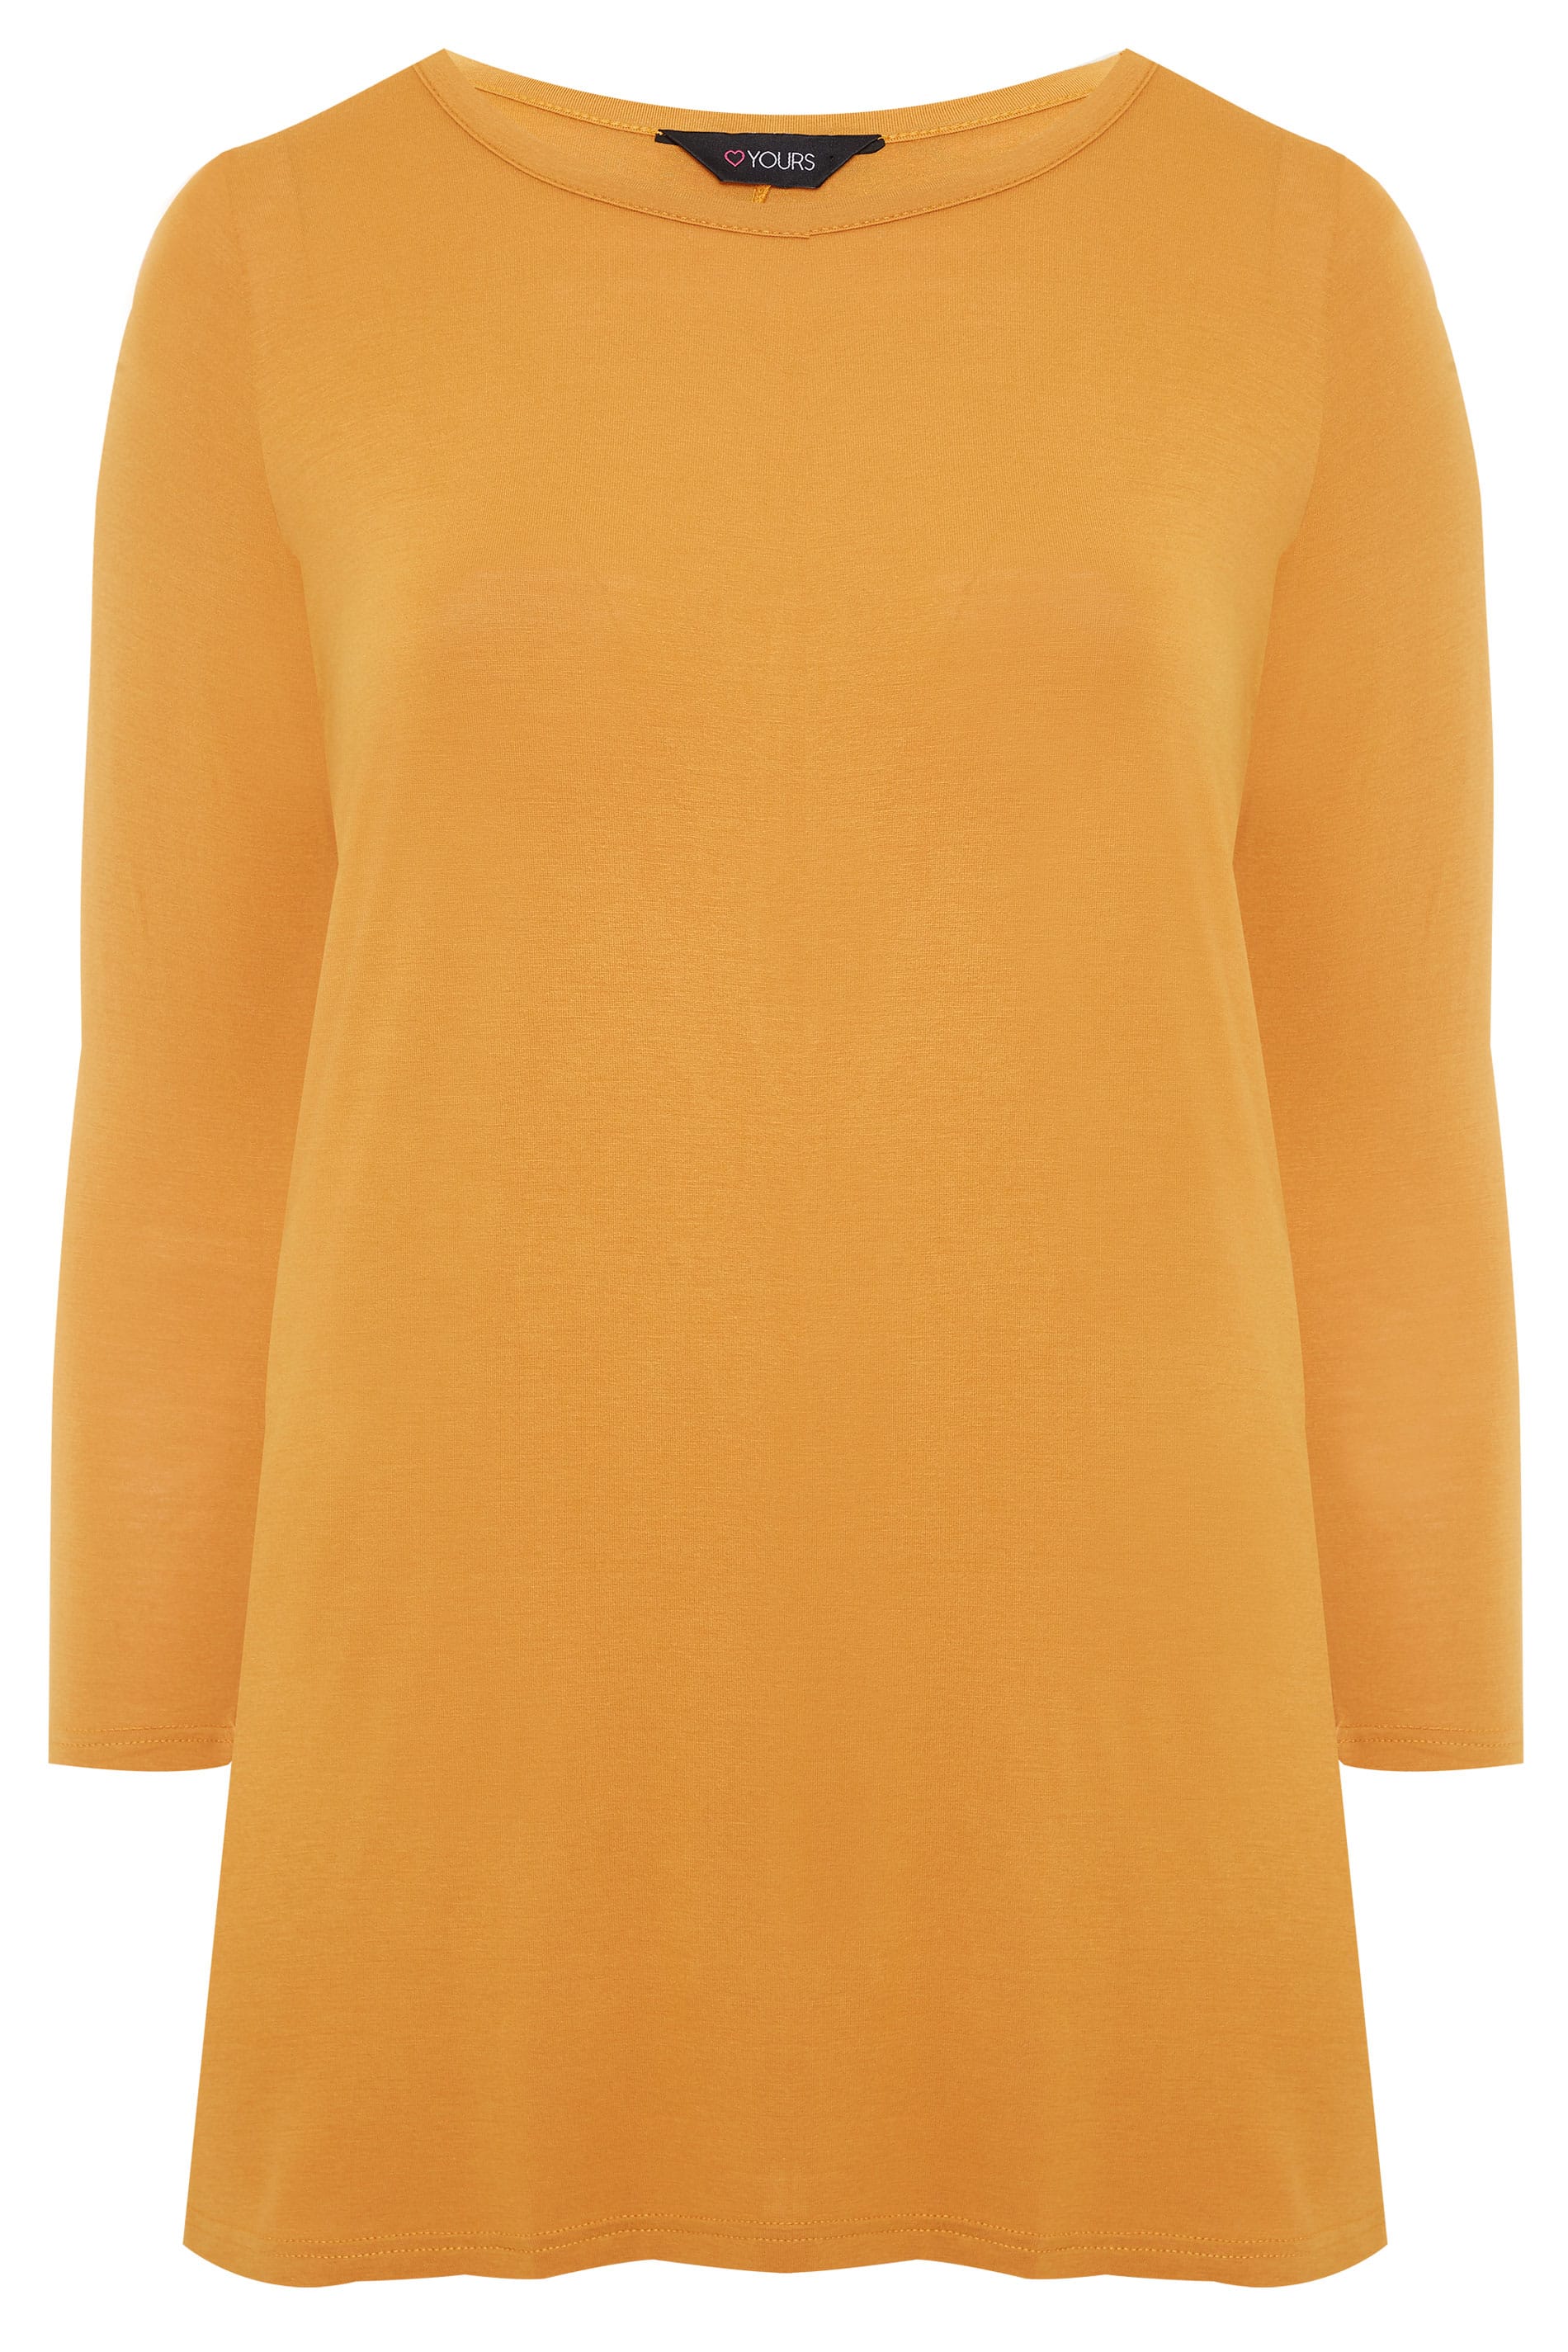 Mustard Long Sleeved Swing Top | Yours Clothing